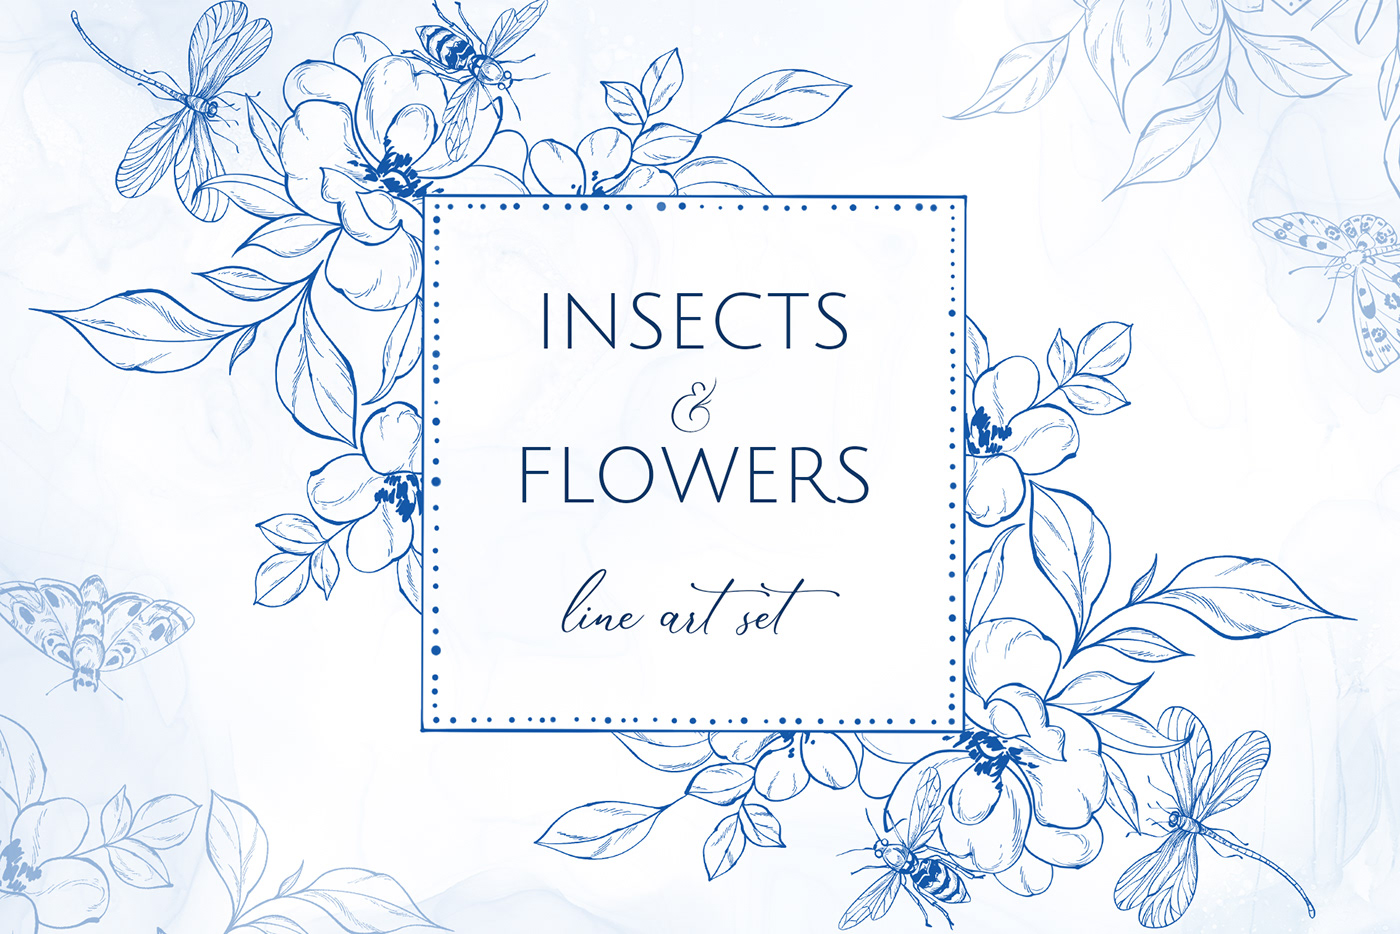 Insects Flowers Bouquets frames floral sketch navy blue blue indigo blue butterfly dragonfly moth butterfly sketch Authentic pencil sketch line art vintage vintage frame line art flower denim blue floral elements insect sketch line art frame line art wreaths seamless borders seamless patterns vintage graphics Wreaths